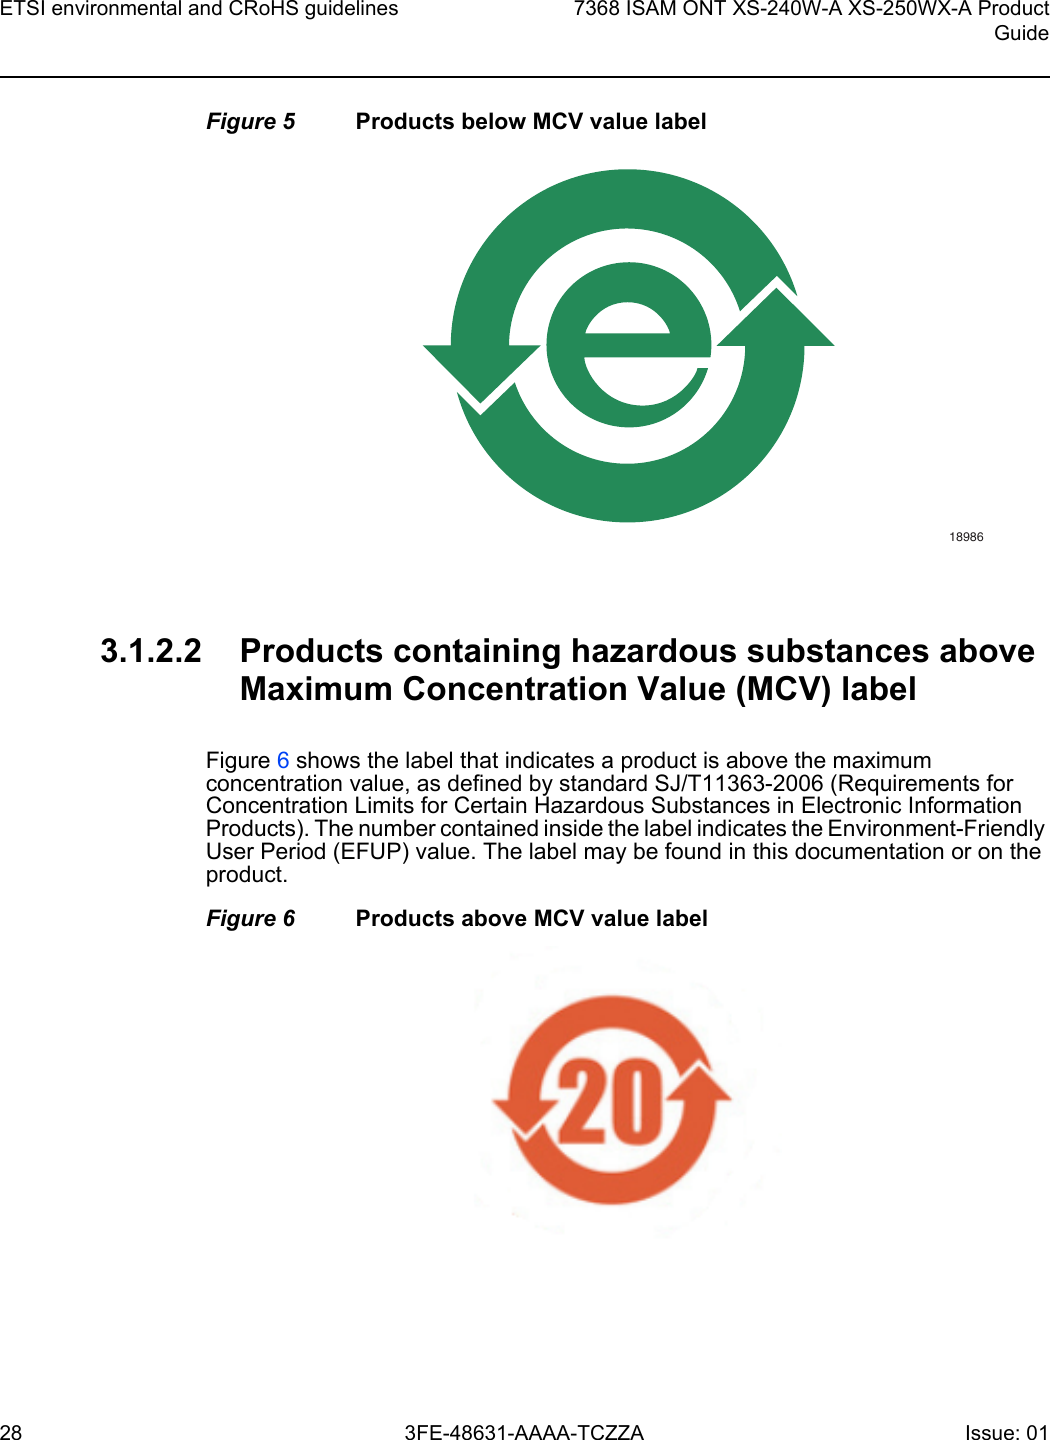 ETSI environmental and CRoHS guidelines287368 ISAM ONT XS-240W-A XS-250WX-A ProductGuide3FE-48631-AAAA-TCZZA Issue: 01 Figure 5 Products below MCV value label3.1.2.2 Products containing hazardous substances above Maximum Concentration Value (MCV) labelFigure 6 shows the label that indicates a product is above the maximum concentration value, as defined by standard SJ/T11363-2006 (Requirements for Concentration Limits for Certain Hazardous Substances in Electronic Information Products). The number contained inside the label indicates the Environment-Friendly User Period (EFUP) value. The label may be found in this documentation or on the product.Figure 6 Products above MCV value label18986